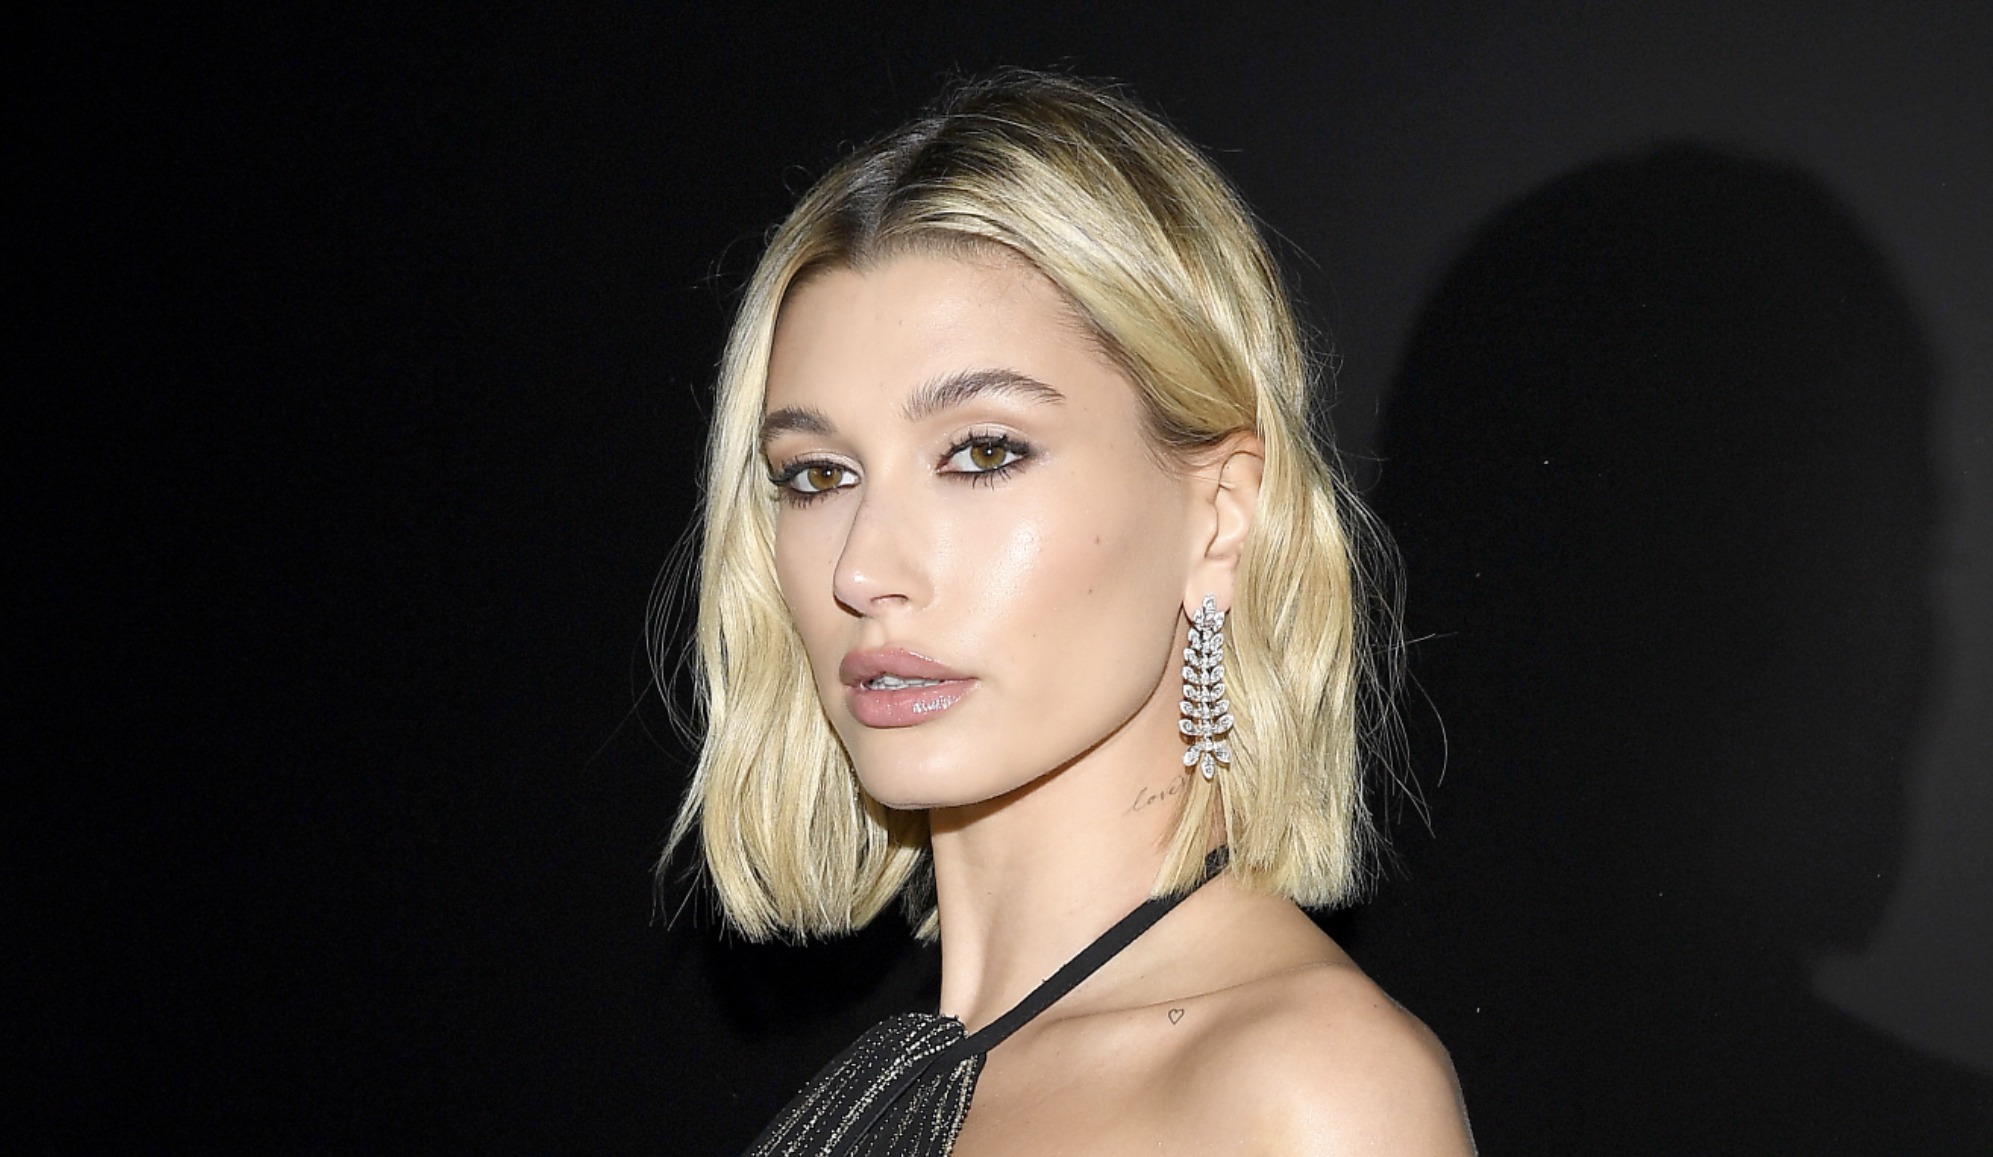 Hailey Bieber Shares Her Makeup-Free Face to Fans | Heavy.com